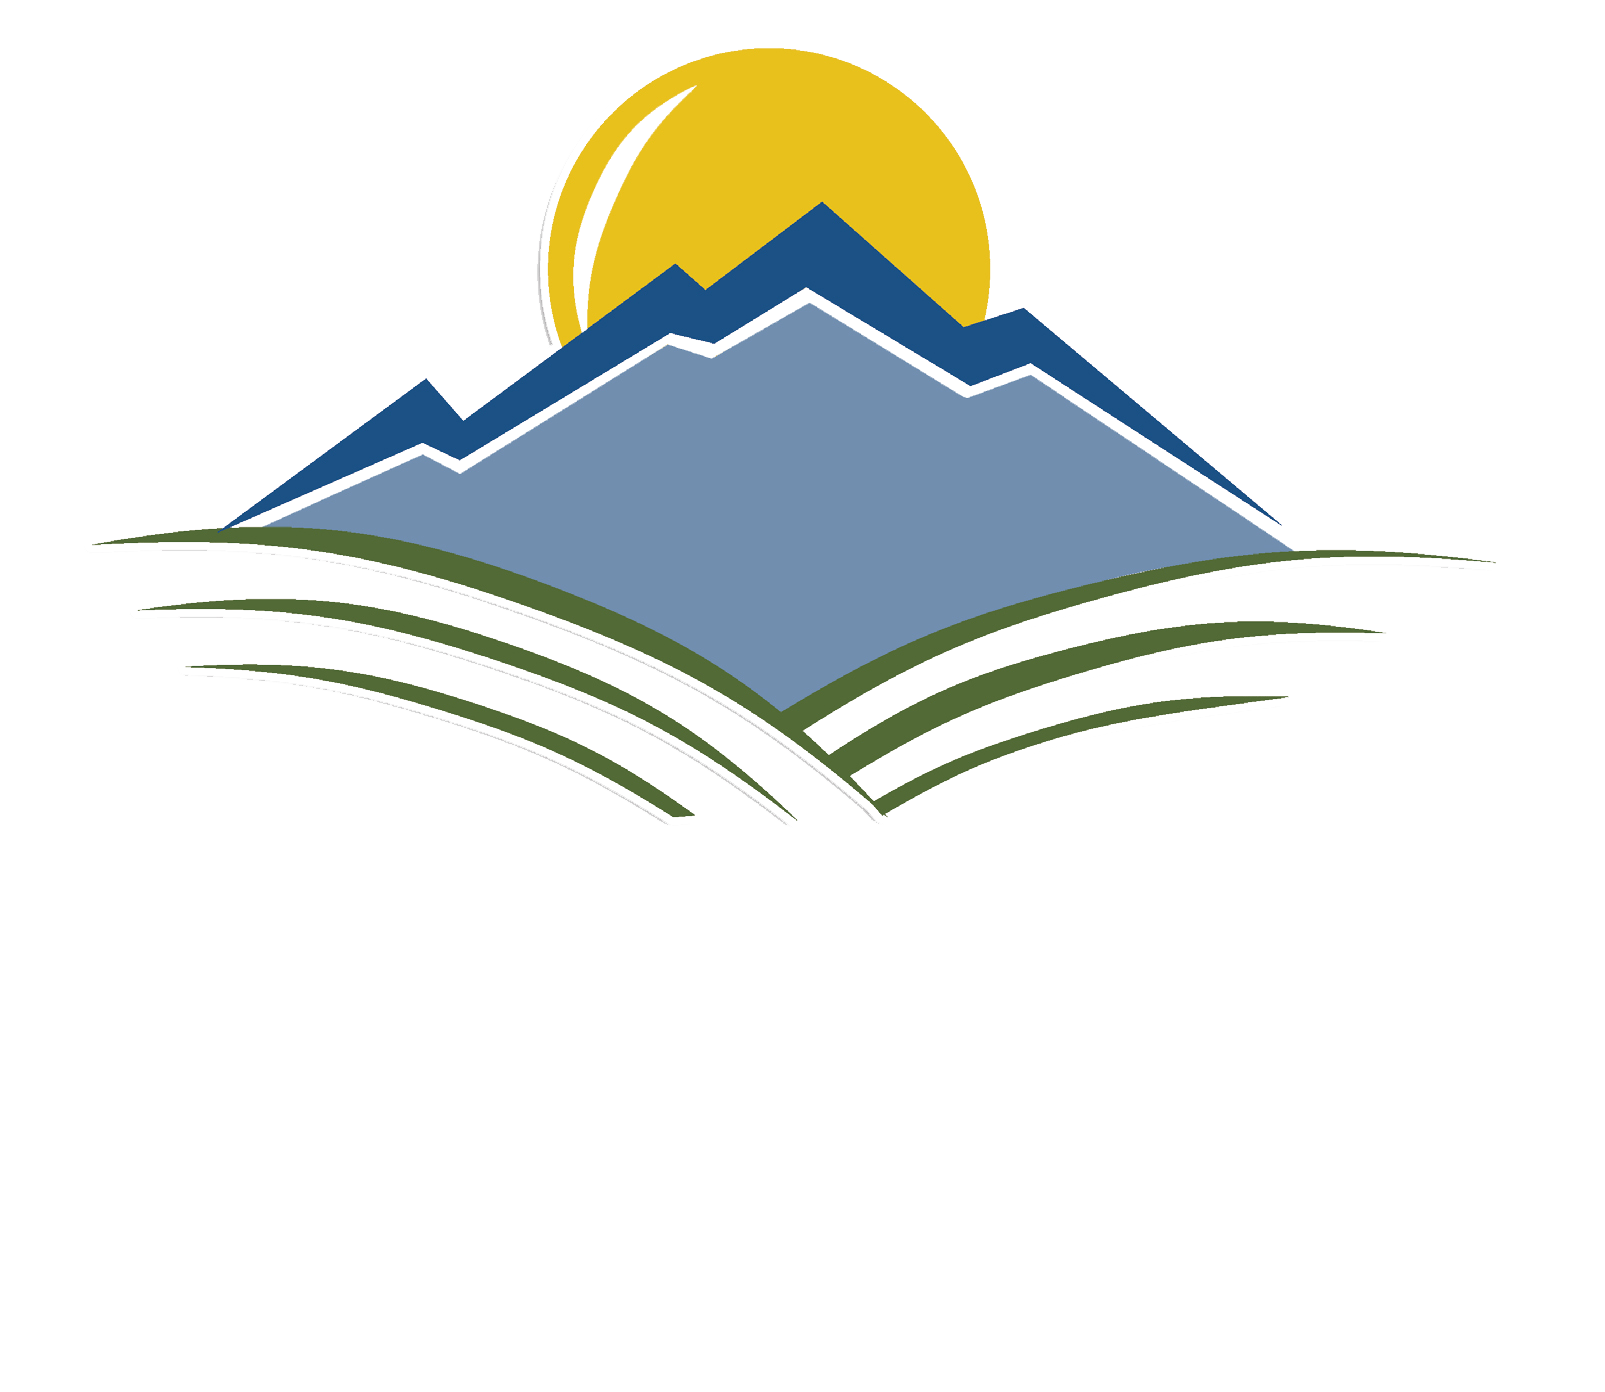 New View Realty LLC